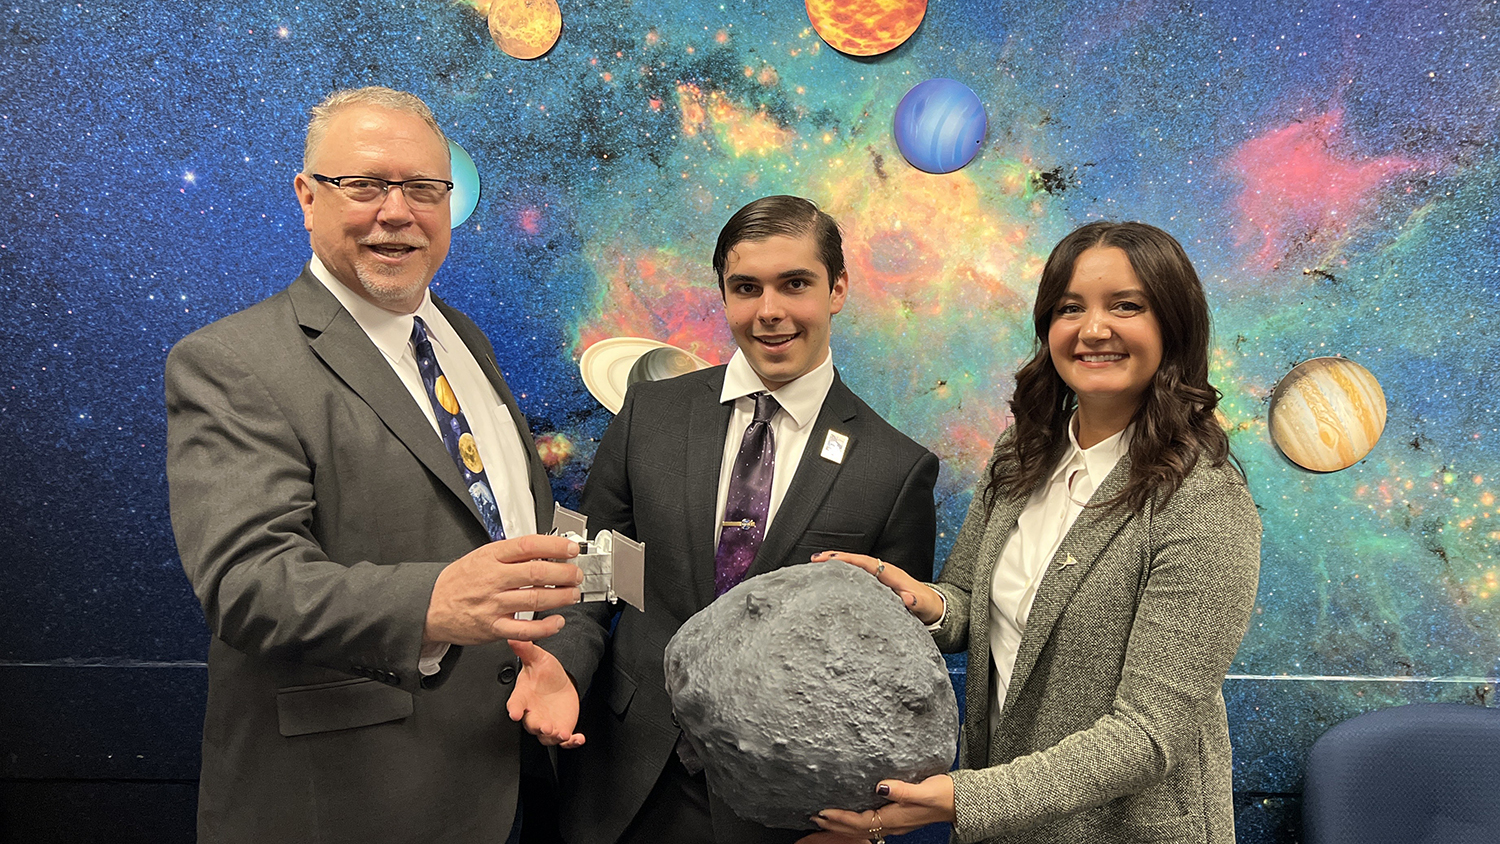 Michael Puzio, center, helps hold a piece of asteroid. On his left is a man and on his right is a woman, both helping to hold the asteroid fragment. Behind all three is a colorful mural depicting various celestial bodies and objects.